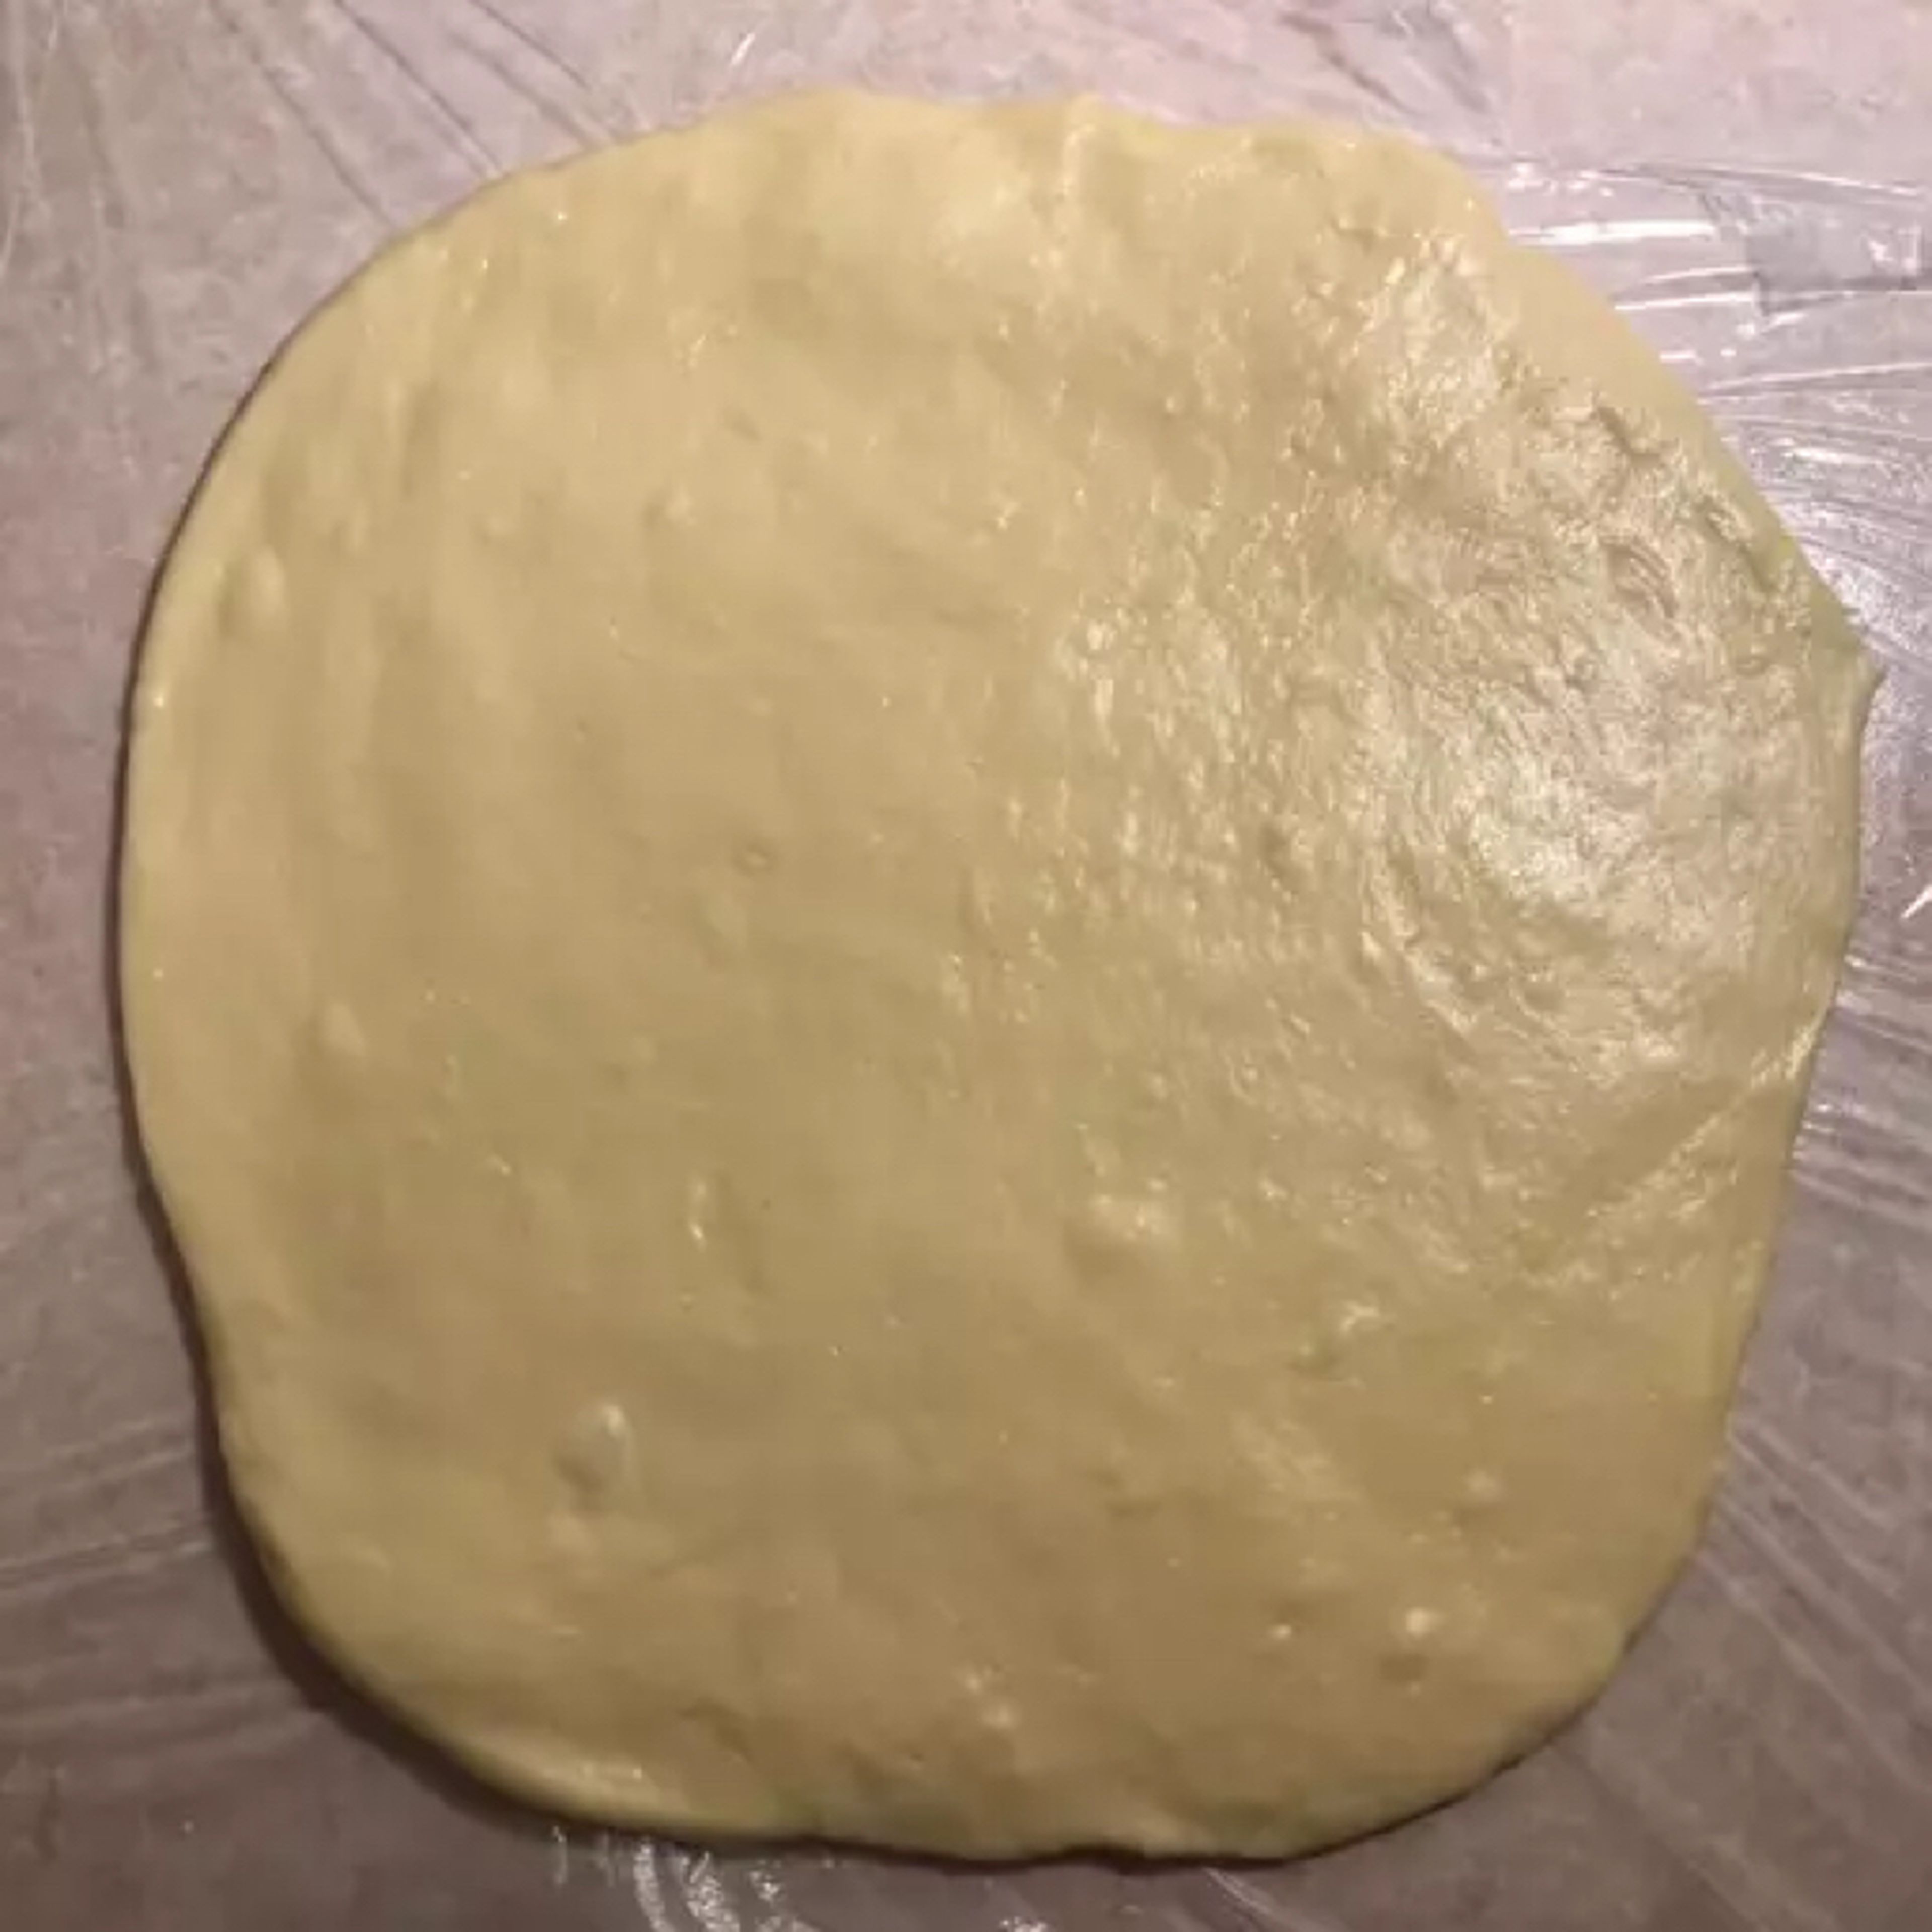 Now divide the dough into four or five equal parts. Open a part with a thickness of 0.5 cm.